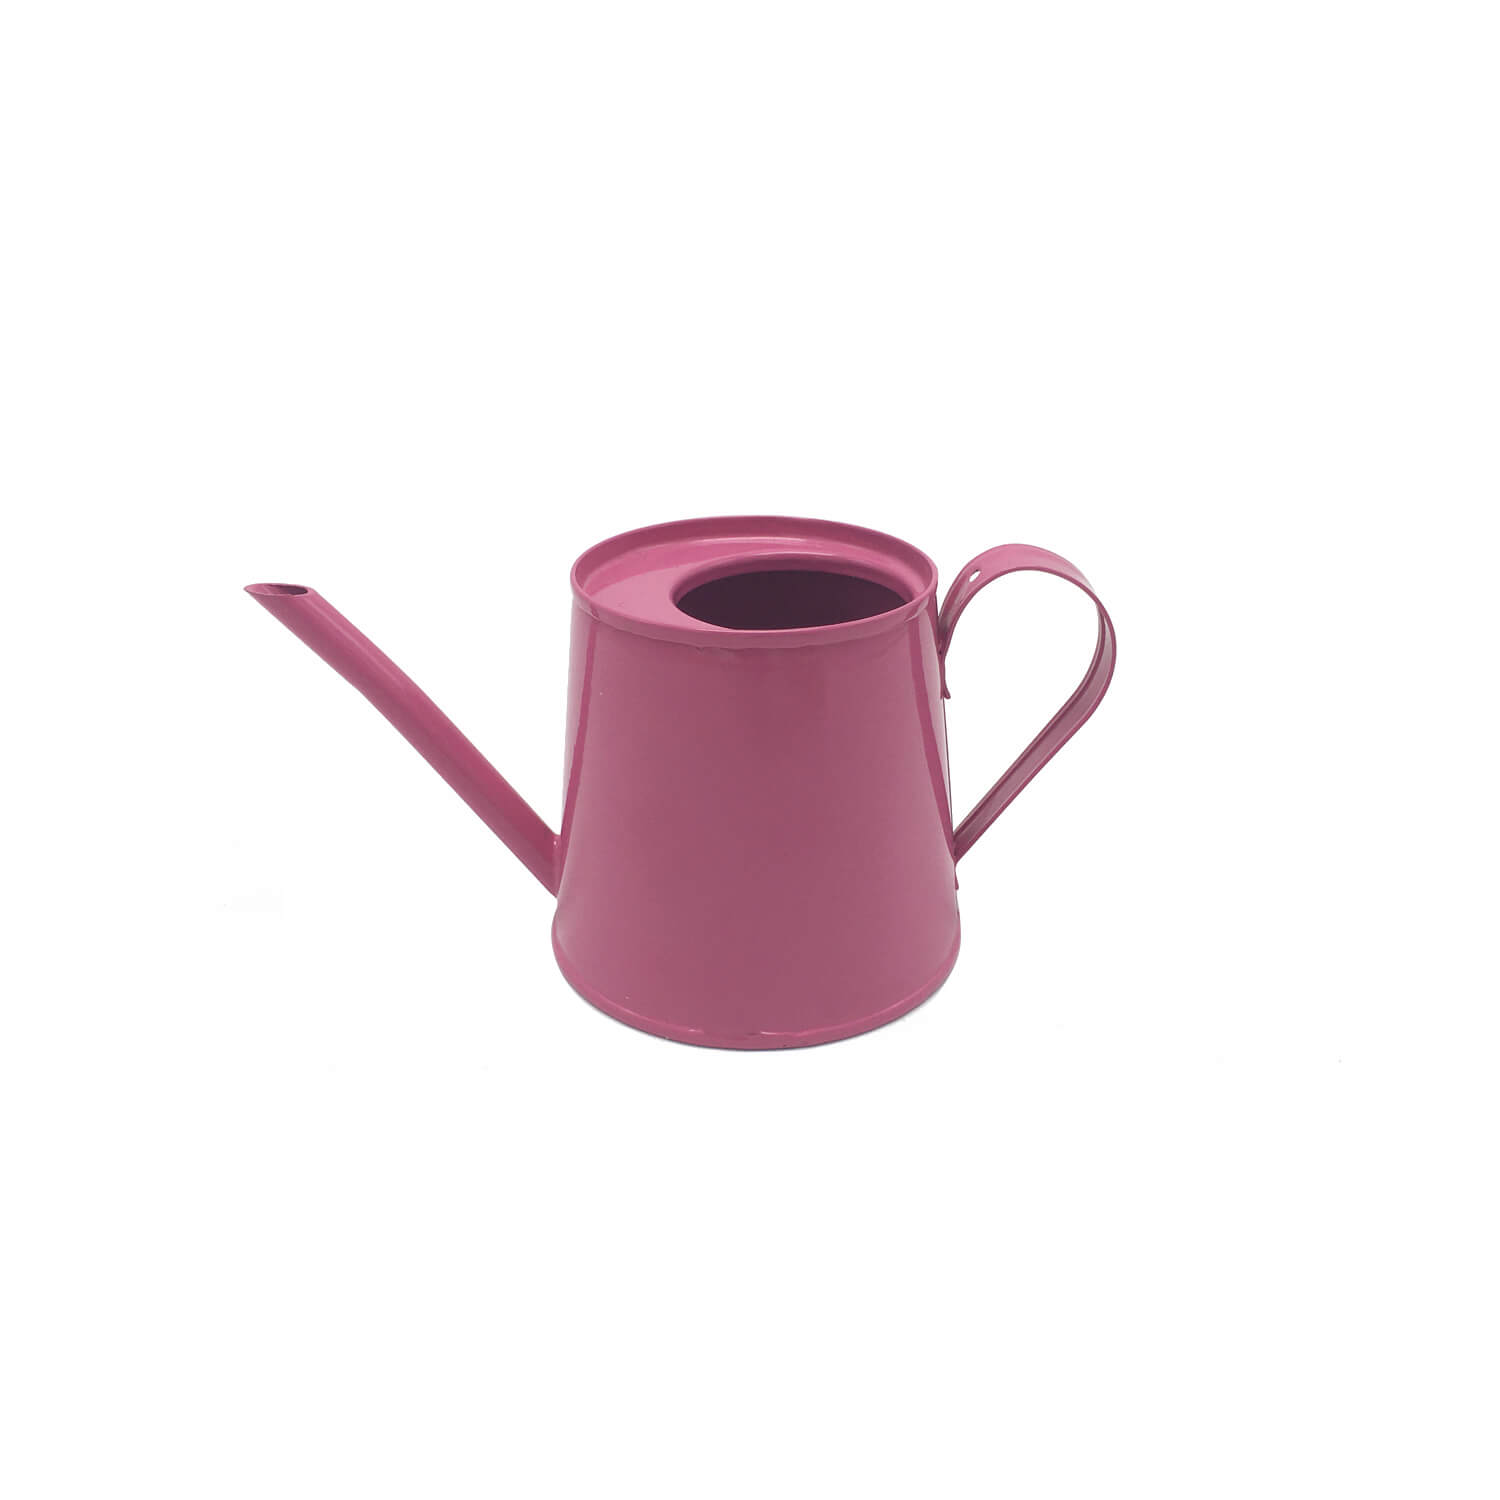 Watering can - Rose red color